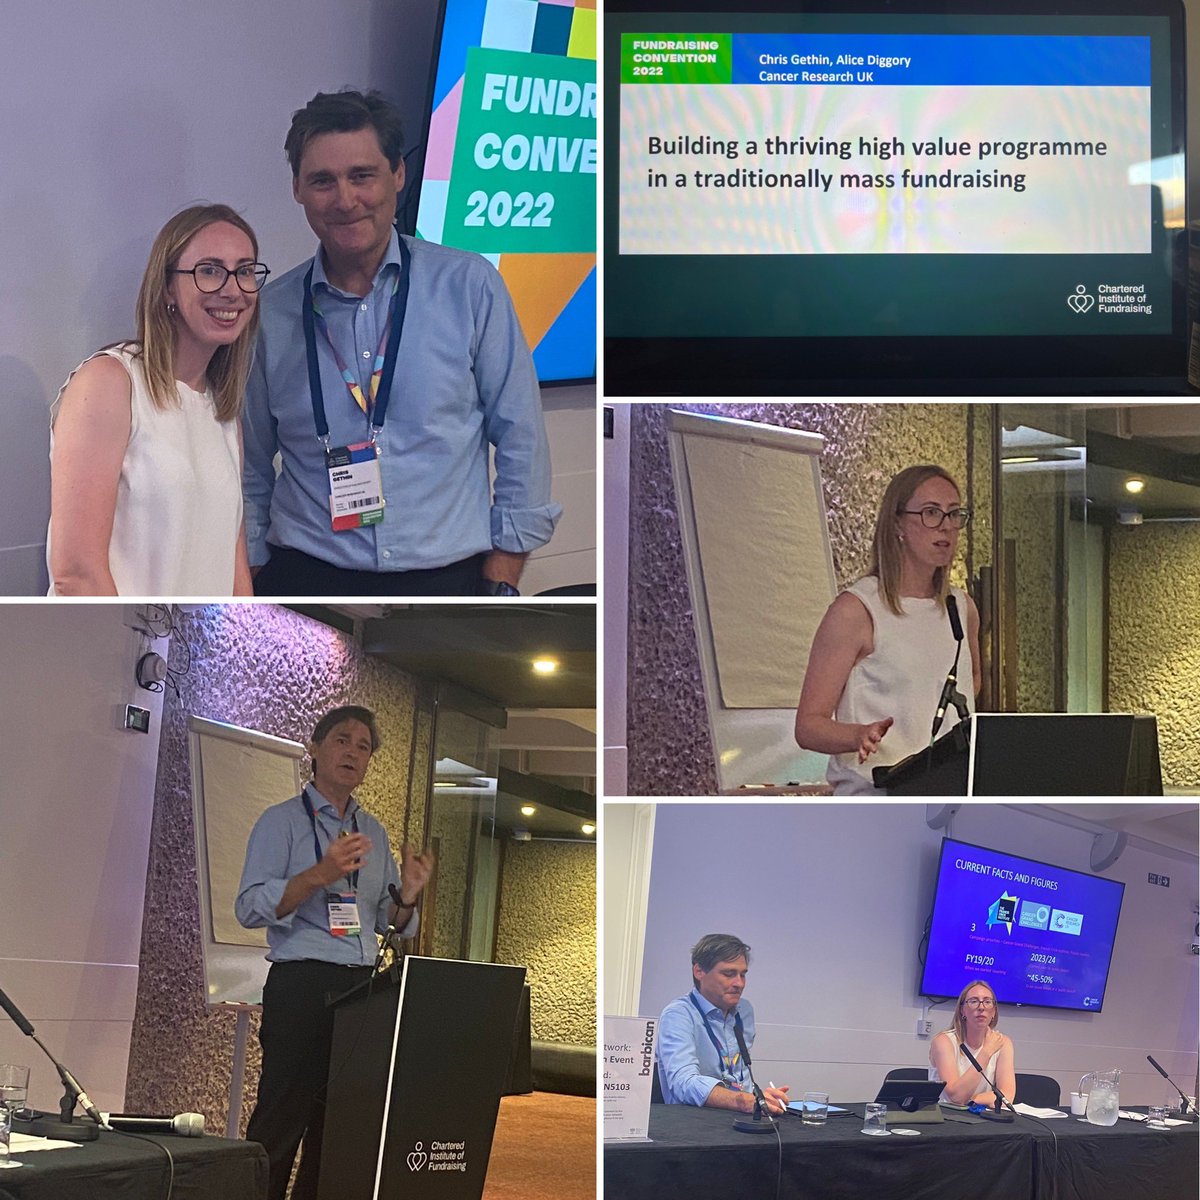 Pleasure to speak at #CIOFFC @CIOFMajorDonor today with the fab Alice Diggory on @CR_UK philanthropy and also my recent MA in Philanthropic Studies research findings @UniKentCfP @UniKent